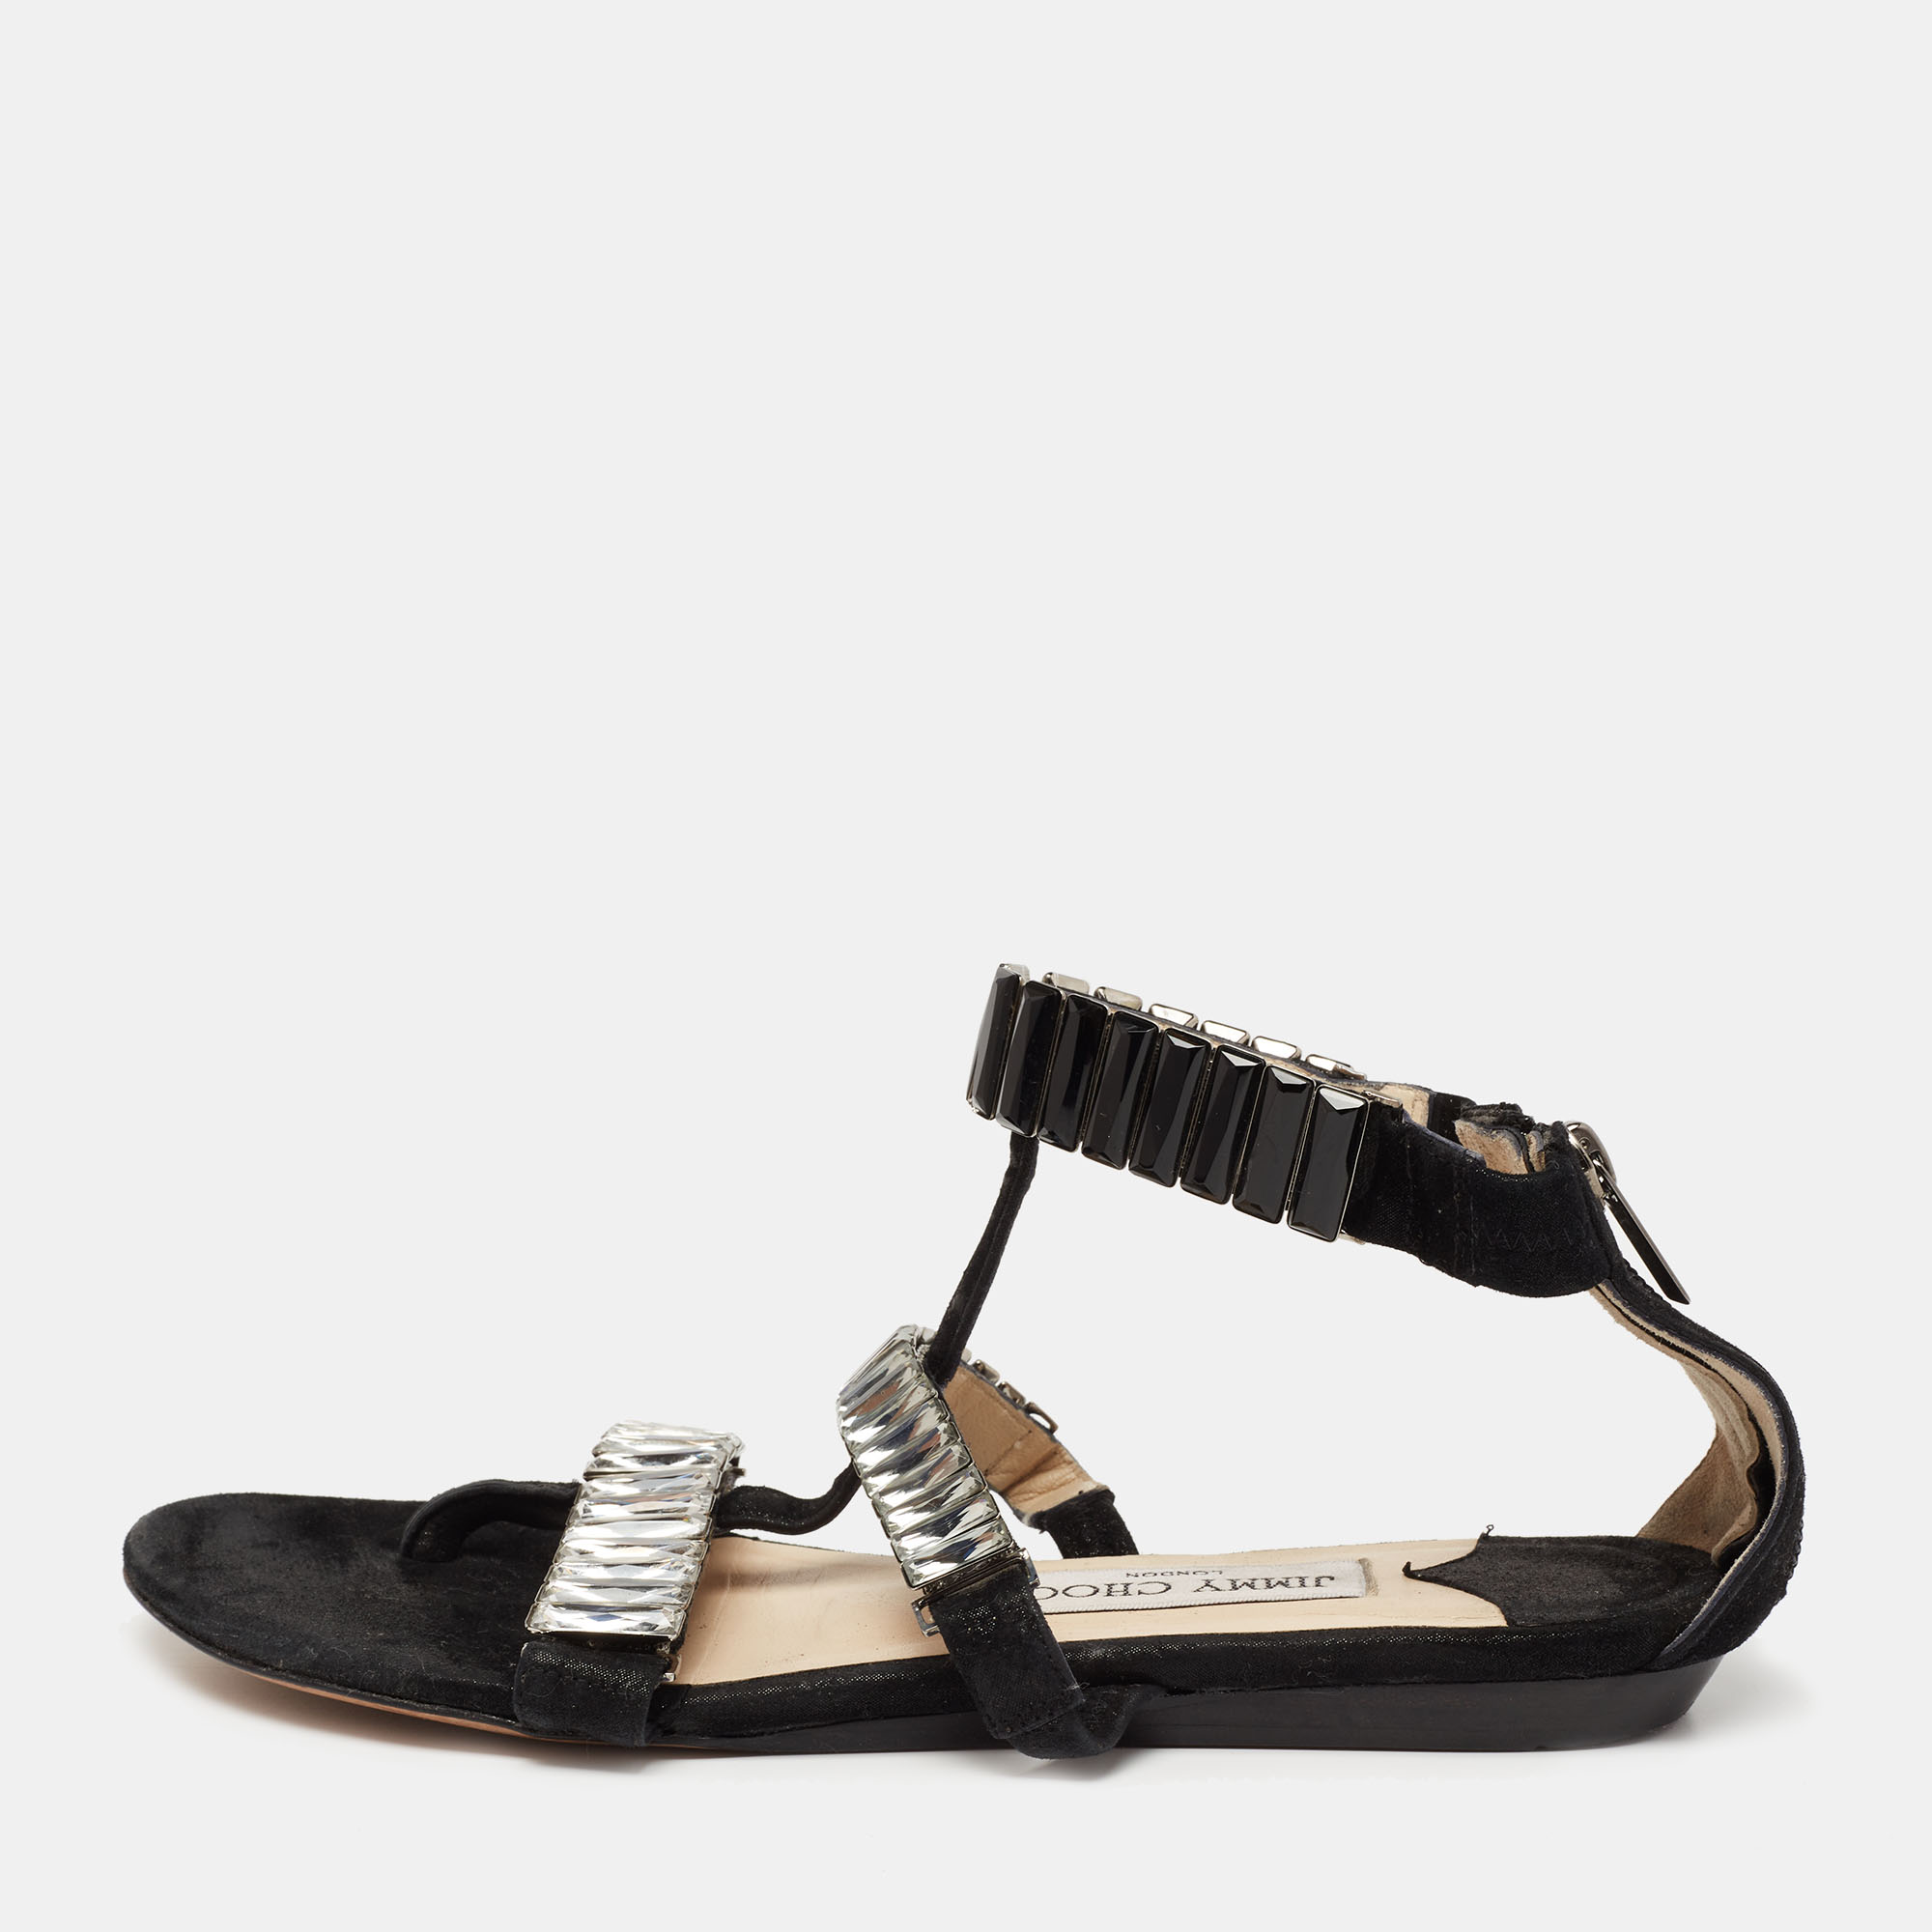 Perfectly blending comfort and style these glamorous flat sandals from Jimmy Choo need to be owned by you They are crafted from black suede and flaunt mesmerizing crystal embellished straps. They are equipped with back zippers along with comfortable leather insoles and soles.